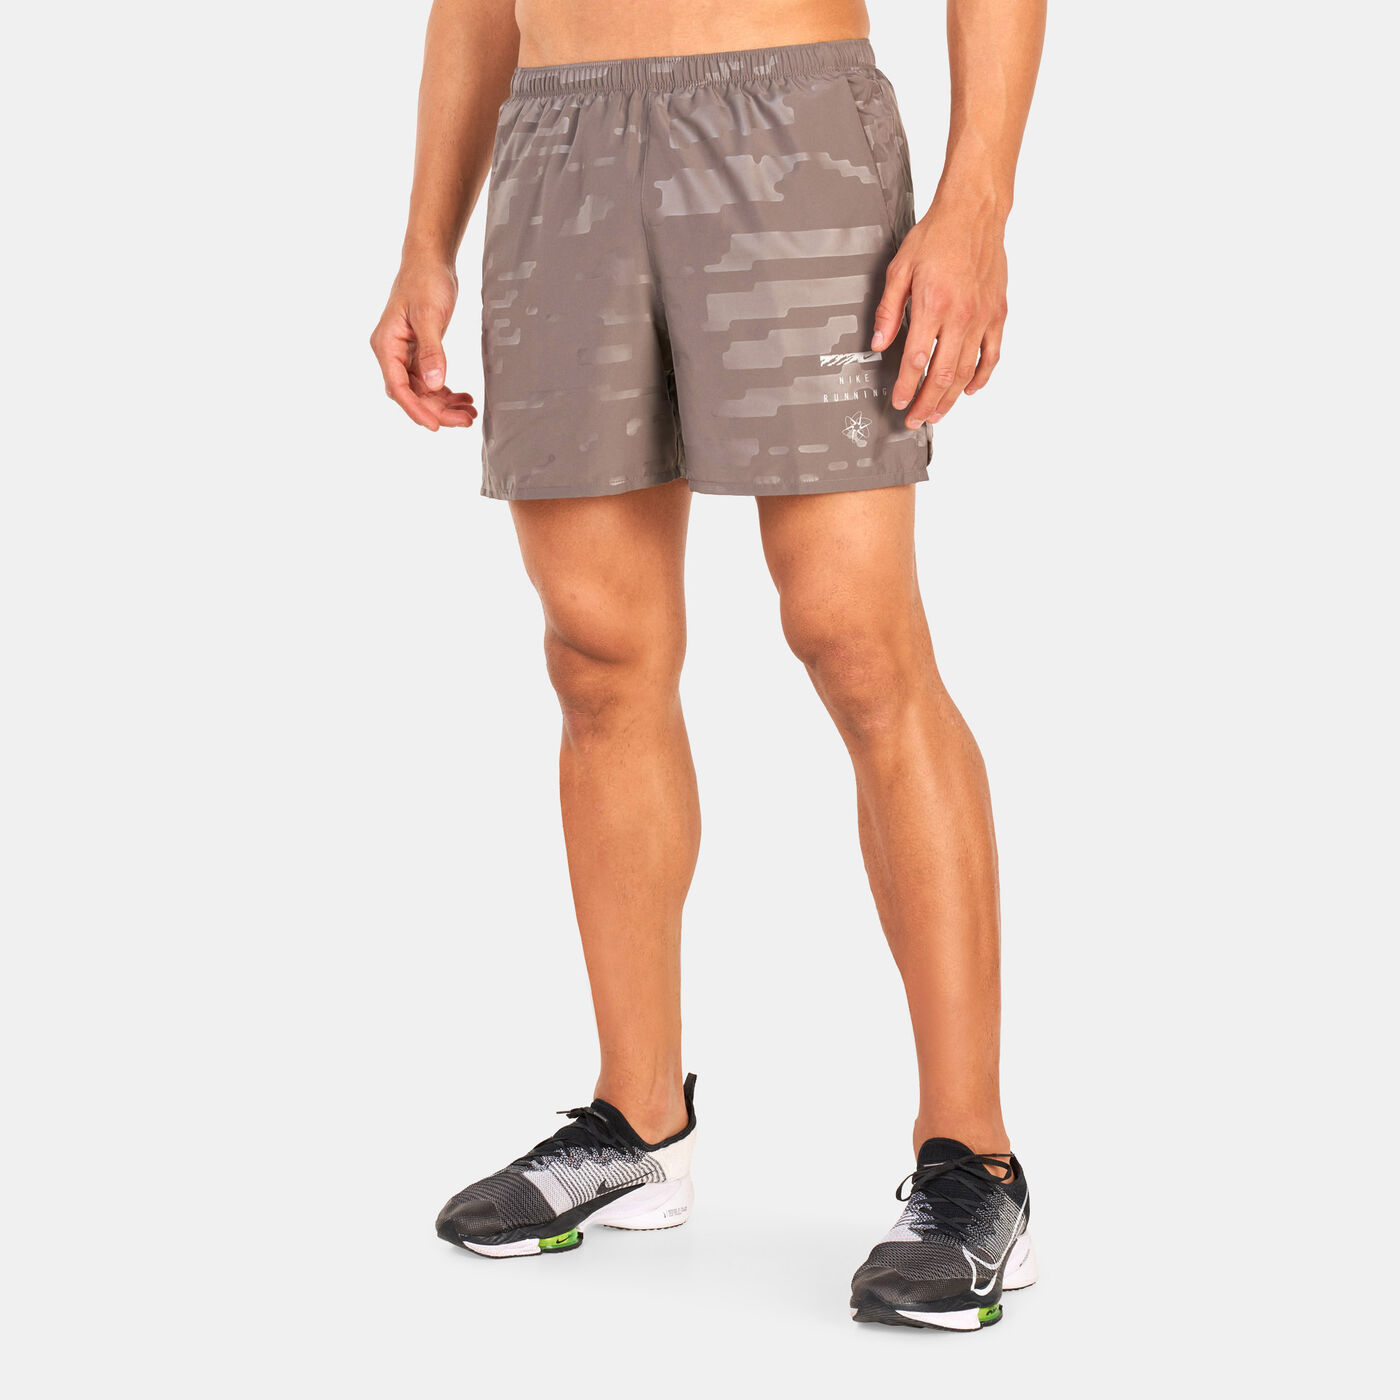 Men's Dri-FIT Run Division Challenger Brief-Lined Running Shorts